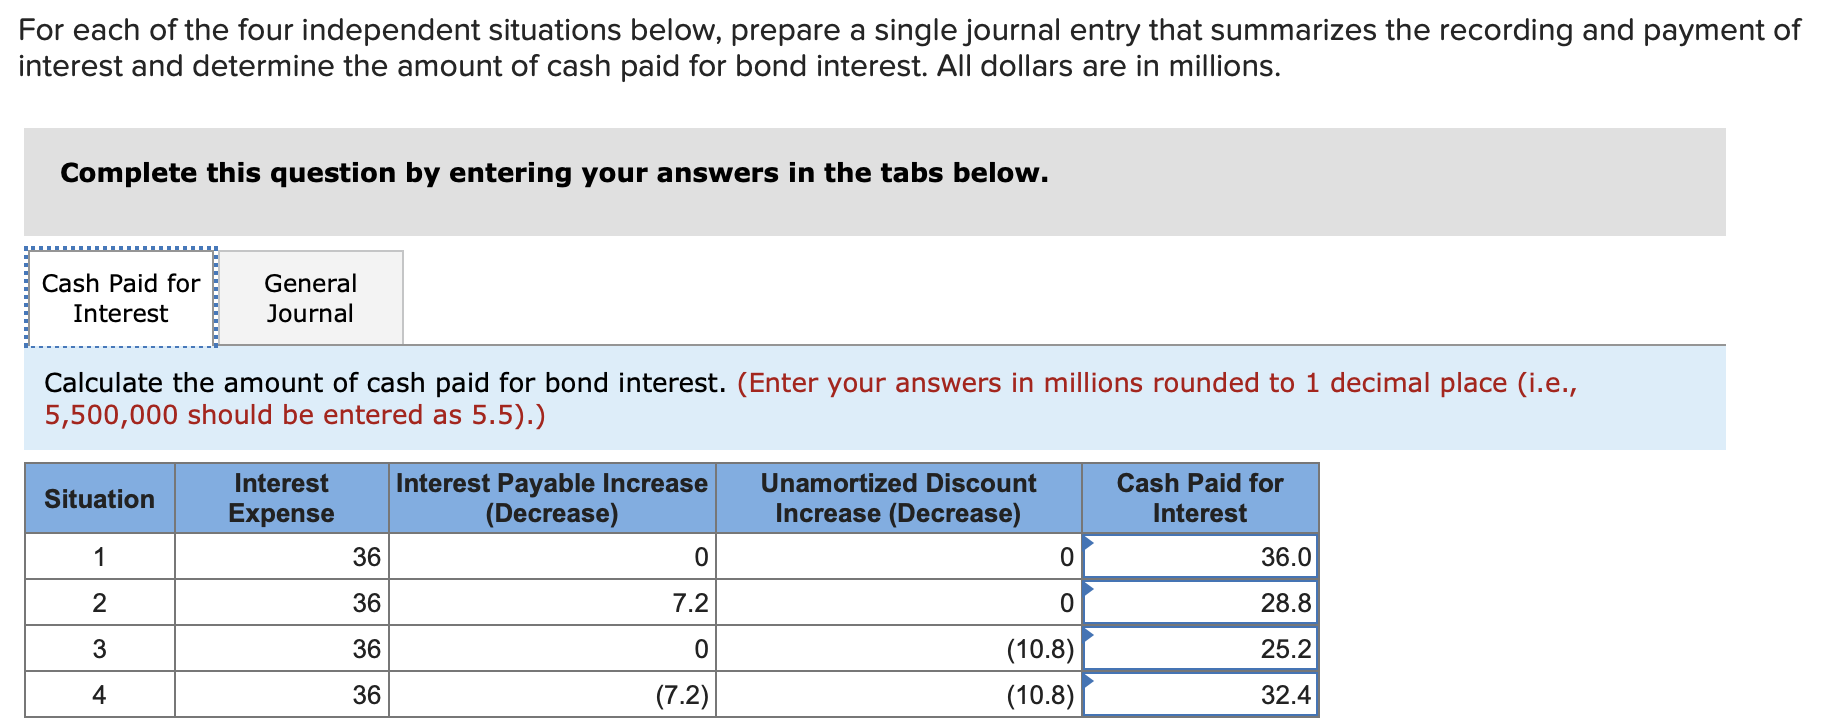 For each of the four independent situations below, prepare a single journal entry that summarizes the recording and payment of
interest and determine the amount of cash paid for bond interest. All dollars are in millions.
Complete this question by entering your answers in the tabs below.
Cash Paid for
General
Interest
Journal
Calculate the amount of cash paid for bond interest. (Enter your answers in millions rounded to 1 decimal place (i.e.,
5,500,000 should be entered as 5.5).)
Interest
Interest Payable Increase
(Decrease)
Unamortized Discount
Cash Paid for
Situation
Expense
Increase (Decrease)
Interest
1
36
36.0
36
7.2
28.8
3
36
(10.8)
25.2
4
36
(7.2)
(10.8)
32.4
